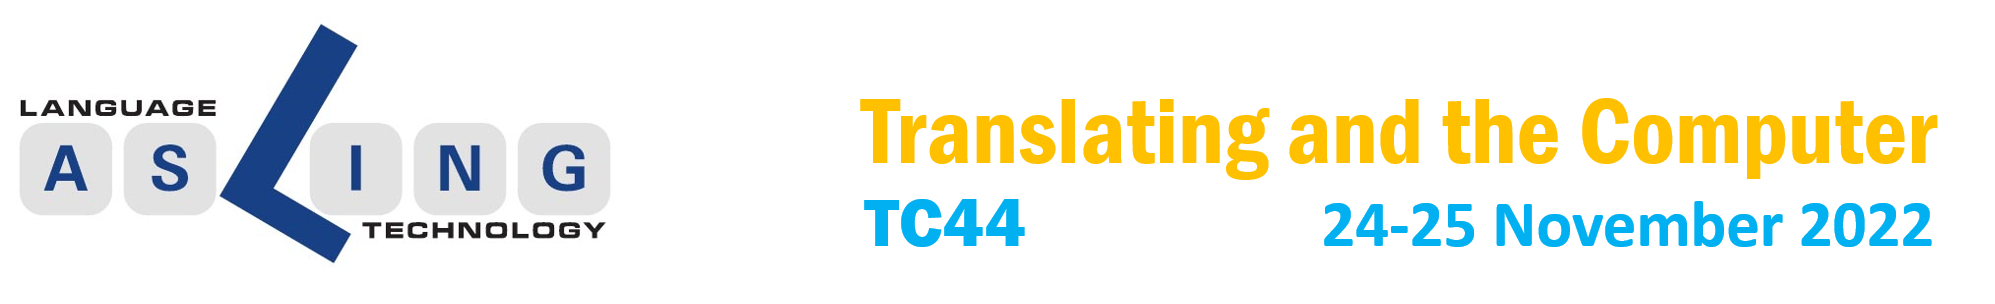 TC44: Translating and the Computer 44